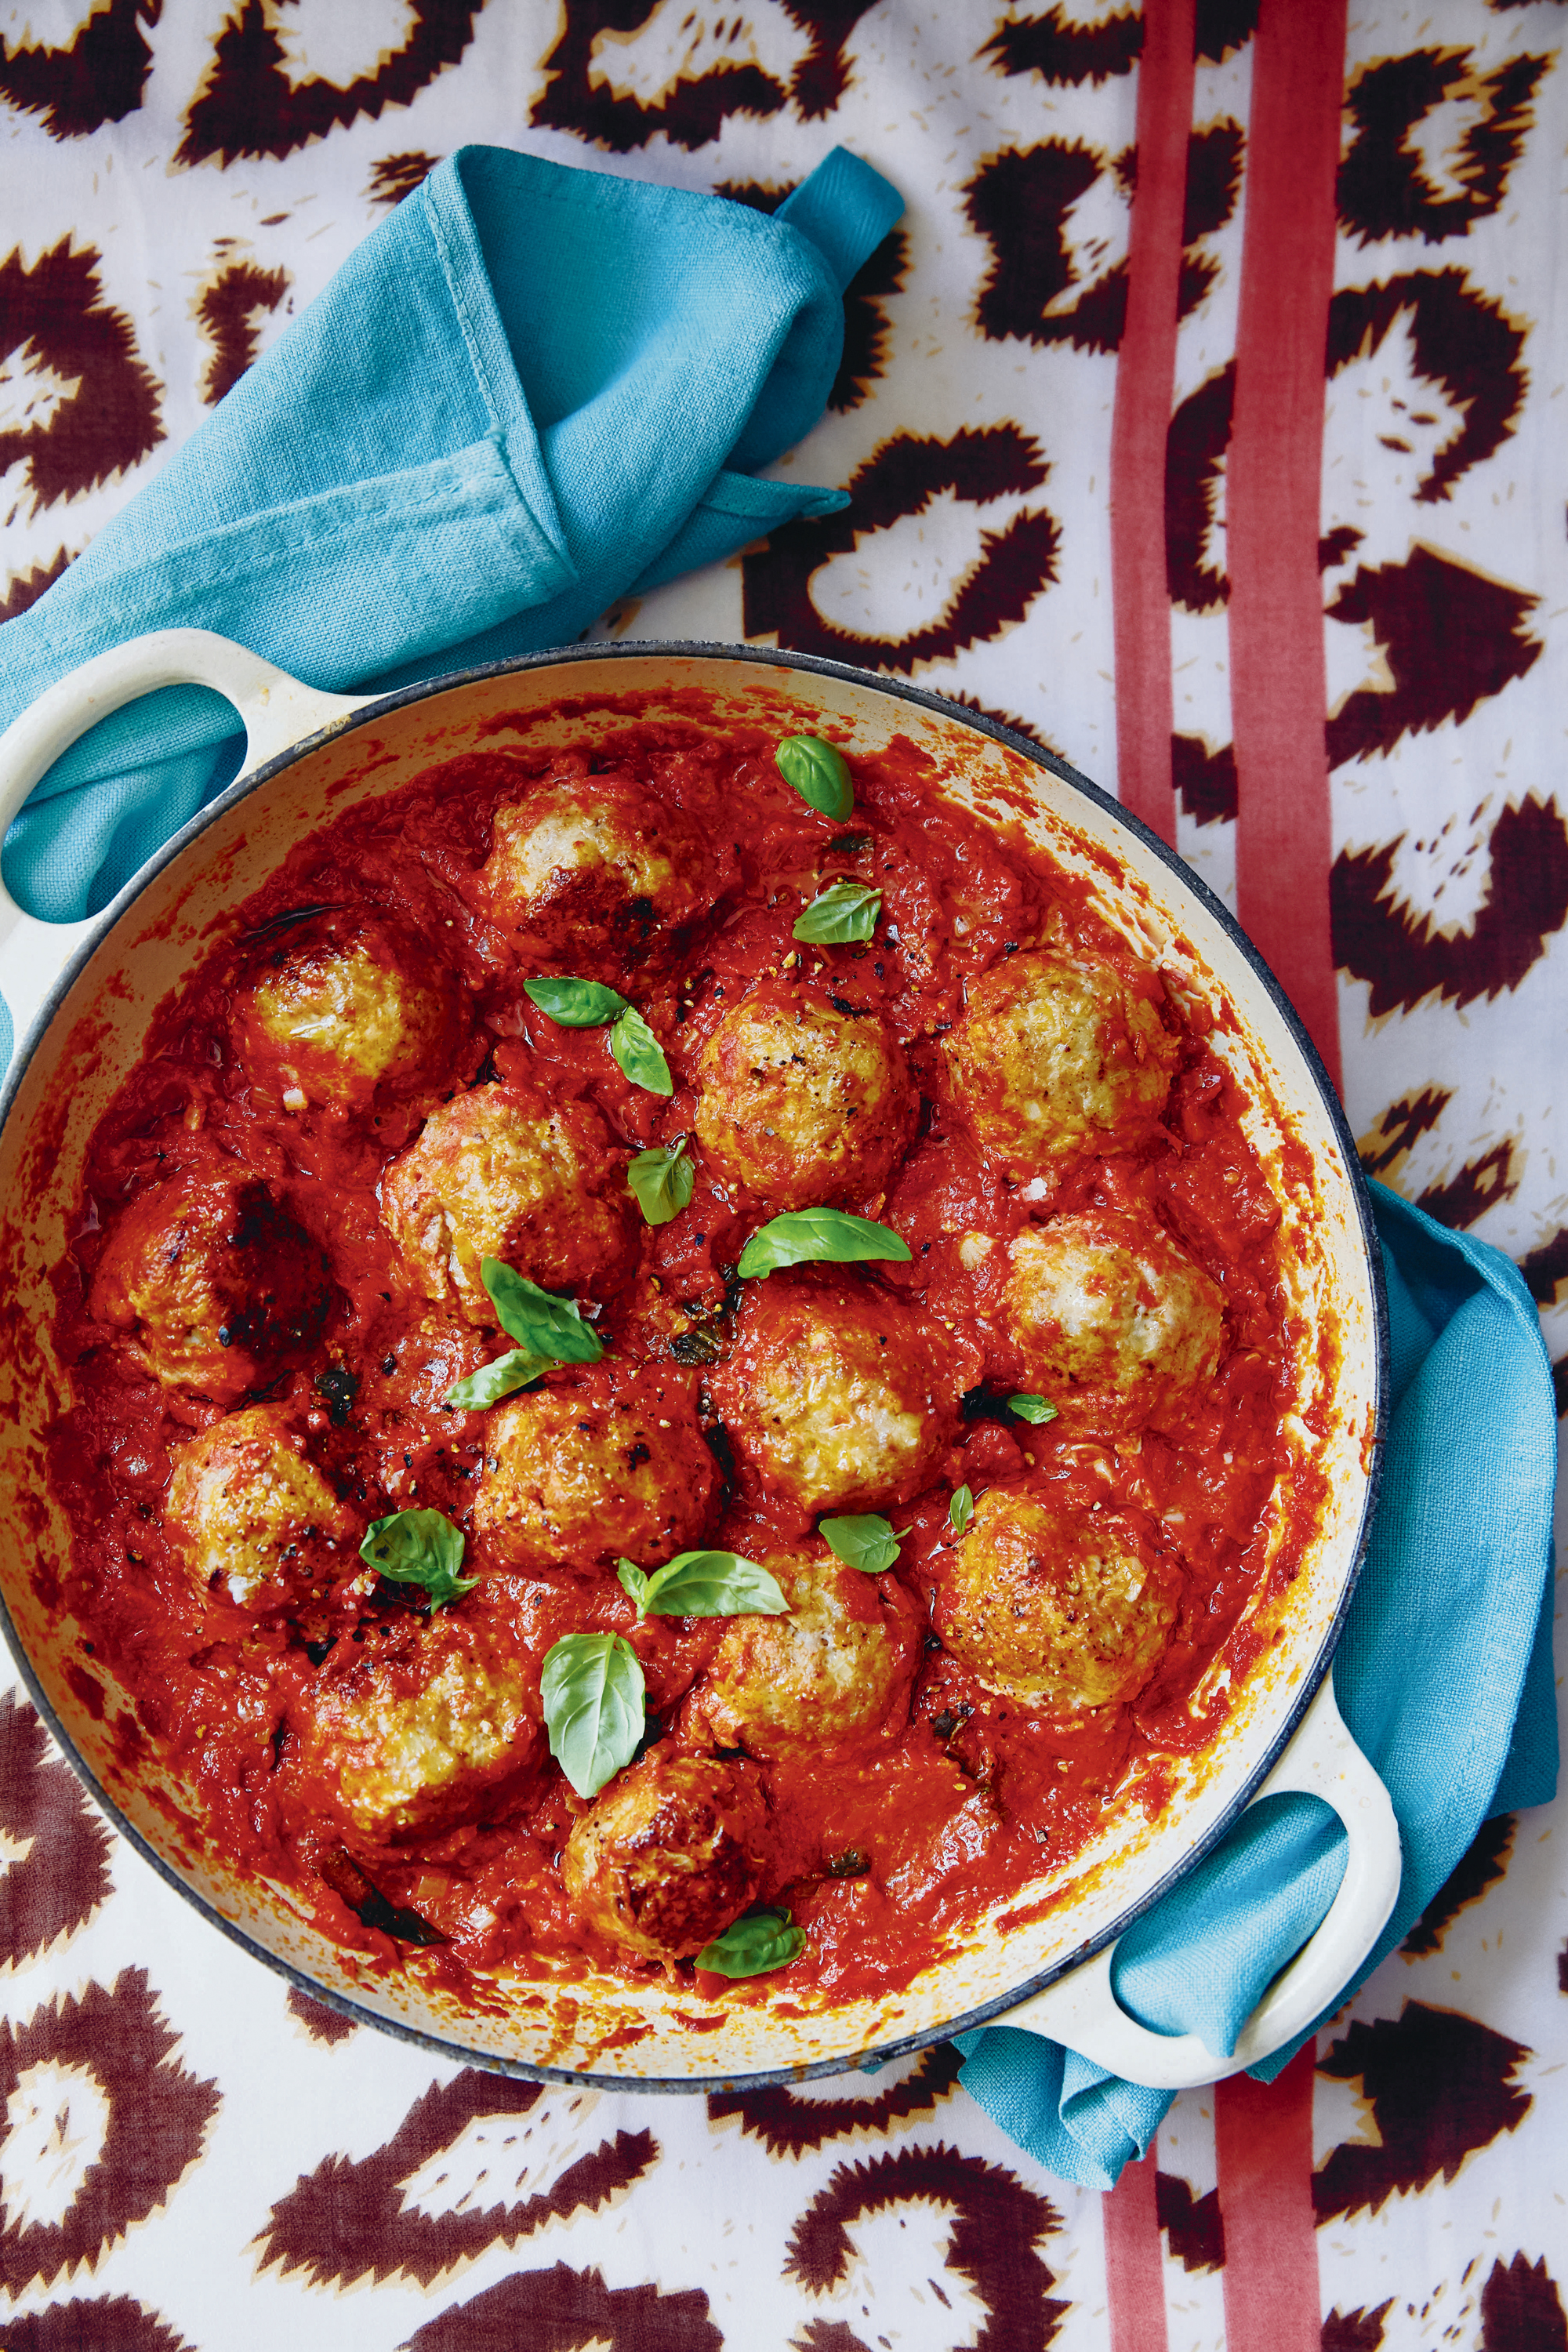 Turkey meatballs from Table Manners: The Cookbook by Jessie and Lennie Ware (Ebury Press, £22) (Ola O Smit/PA)